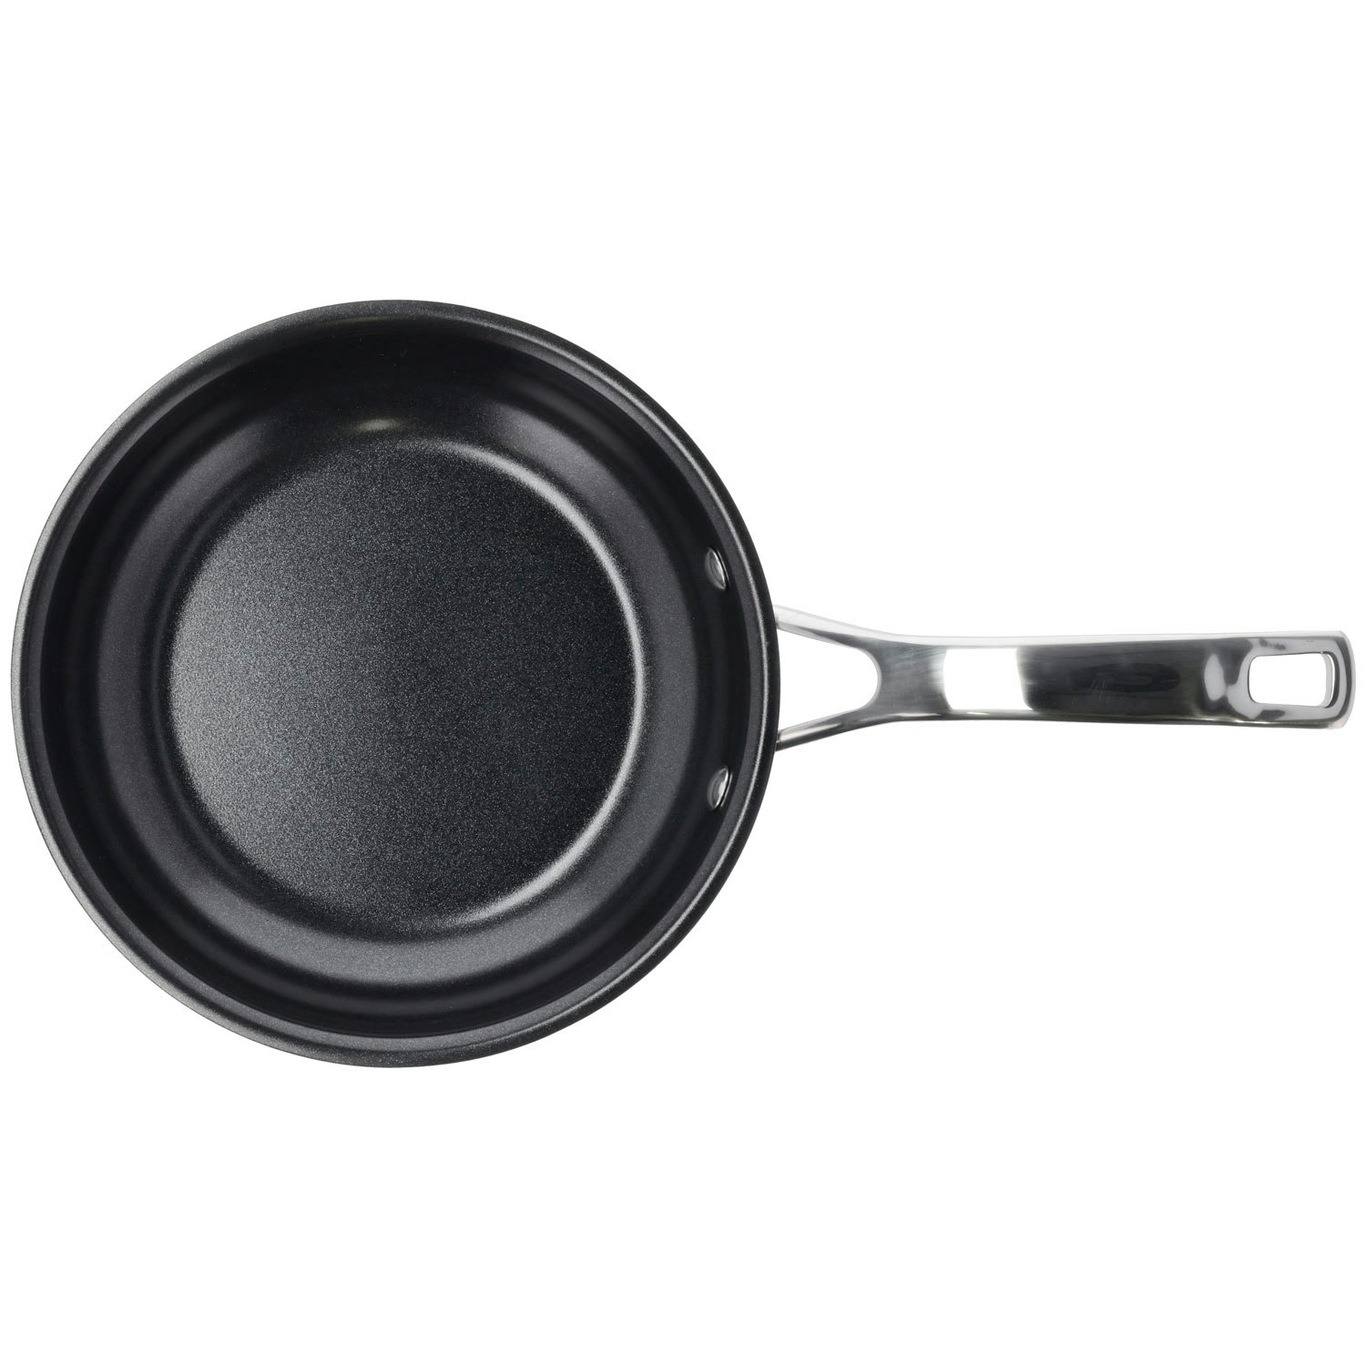 https://royaldesign.com/image/2/kitchenware-by-tareq-taylor-ellen-frying-pan-with-ceramic-coating-1?w=800&quality=80